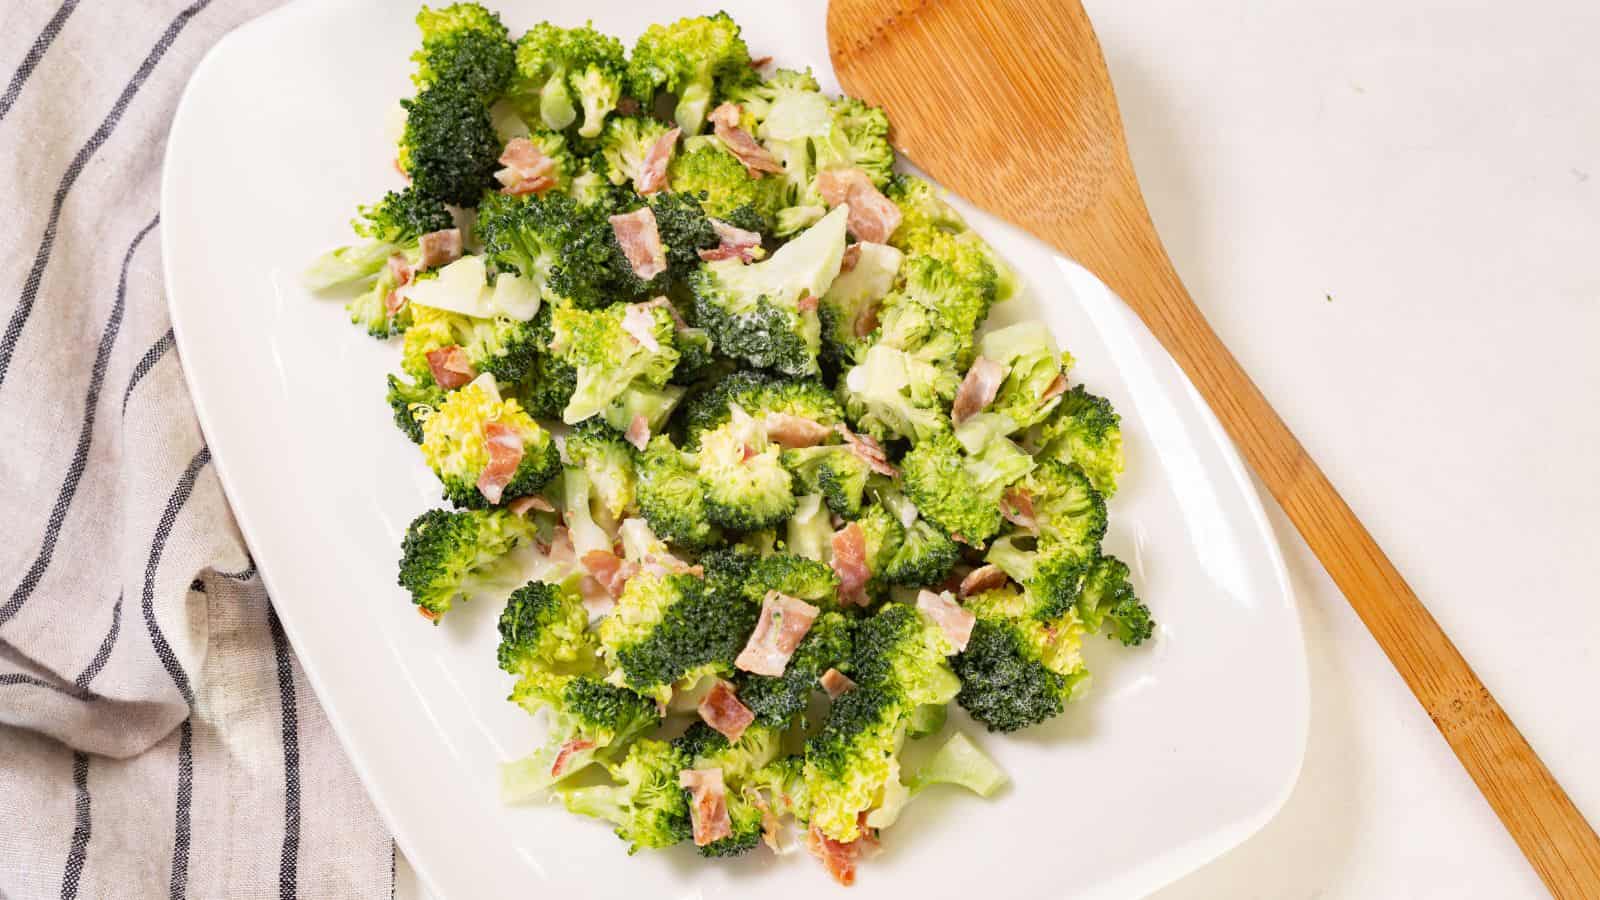 Broccoli salad with bacon bits on a white oval plate, accompanied by a wooden serving spoon on a linen napkin.